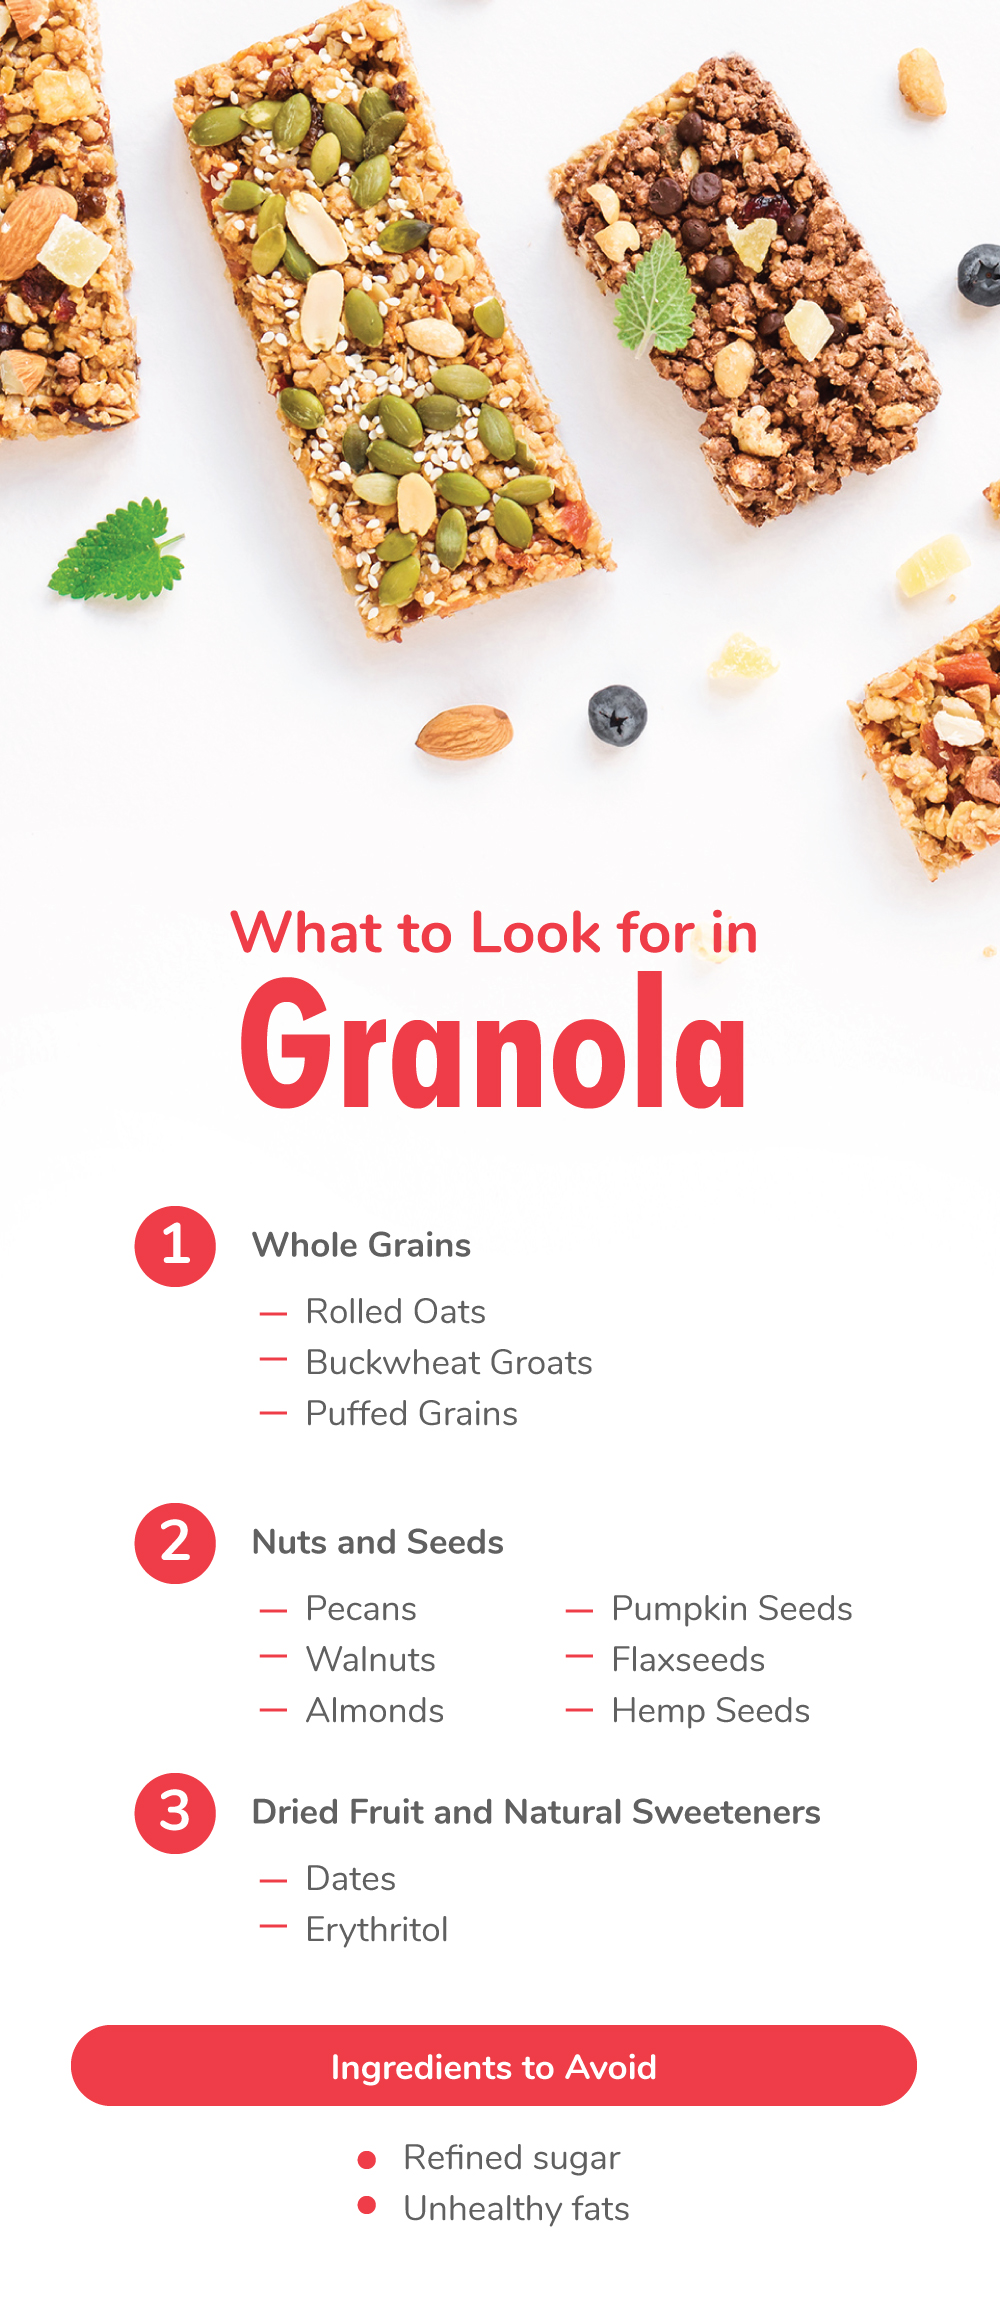 What to Look for in Granola